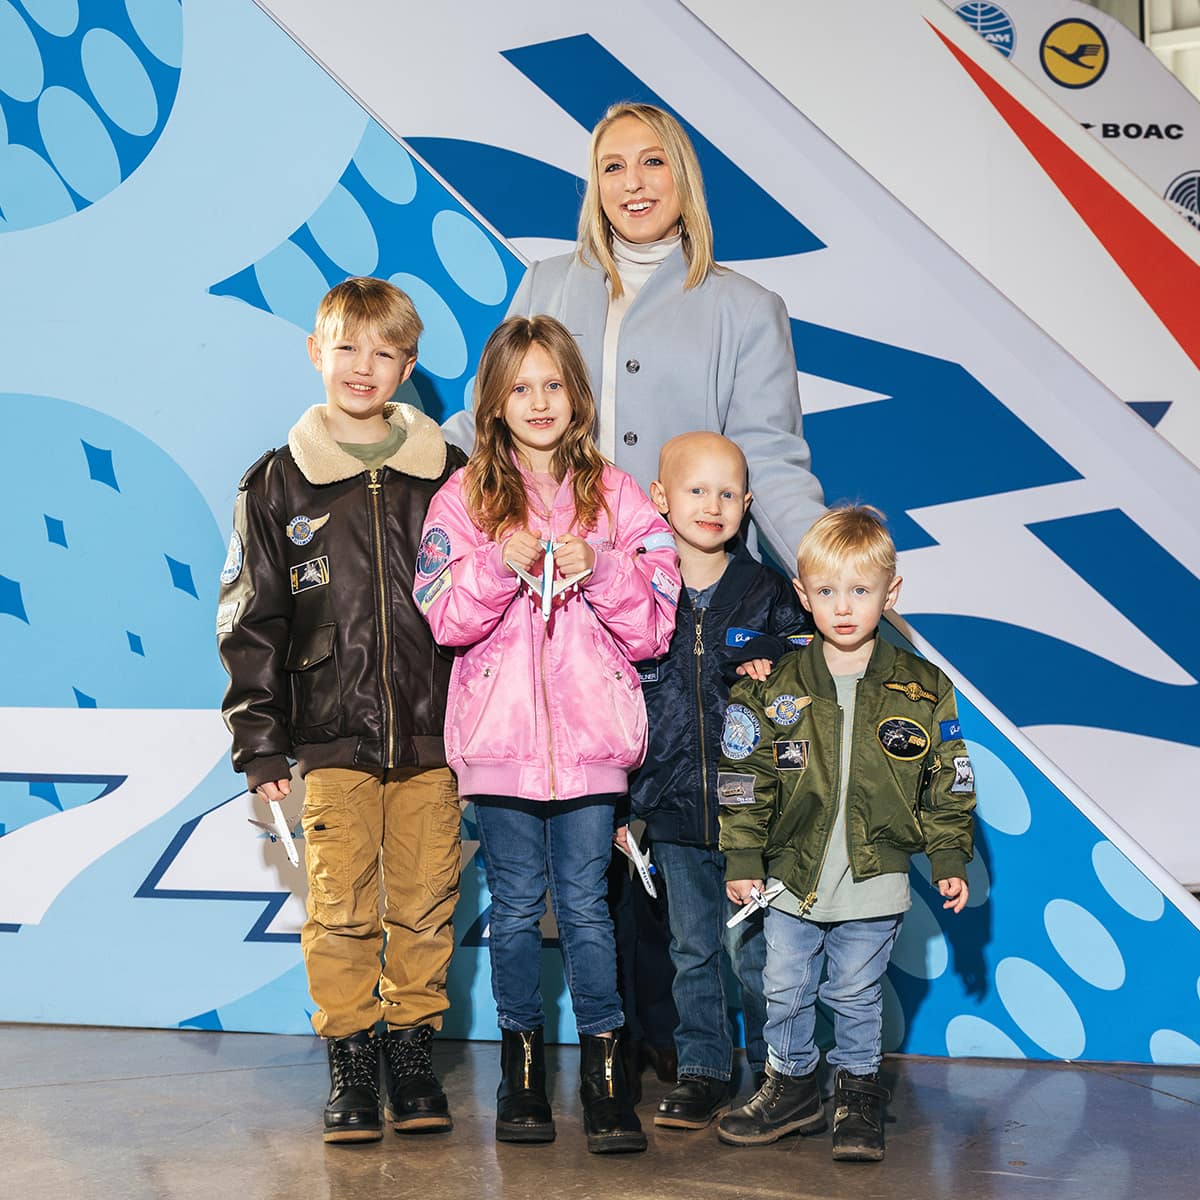 Rachelle stands in front of a 747 aircraft exhibit, her arms around her four children lined up by height.